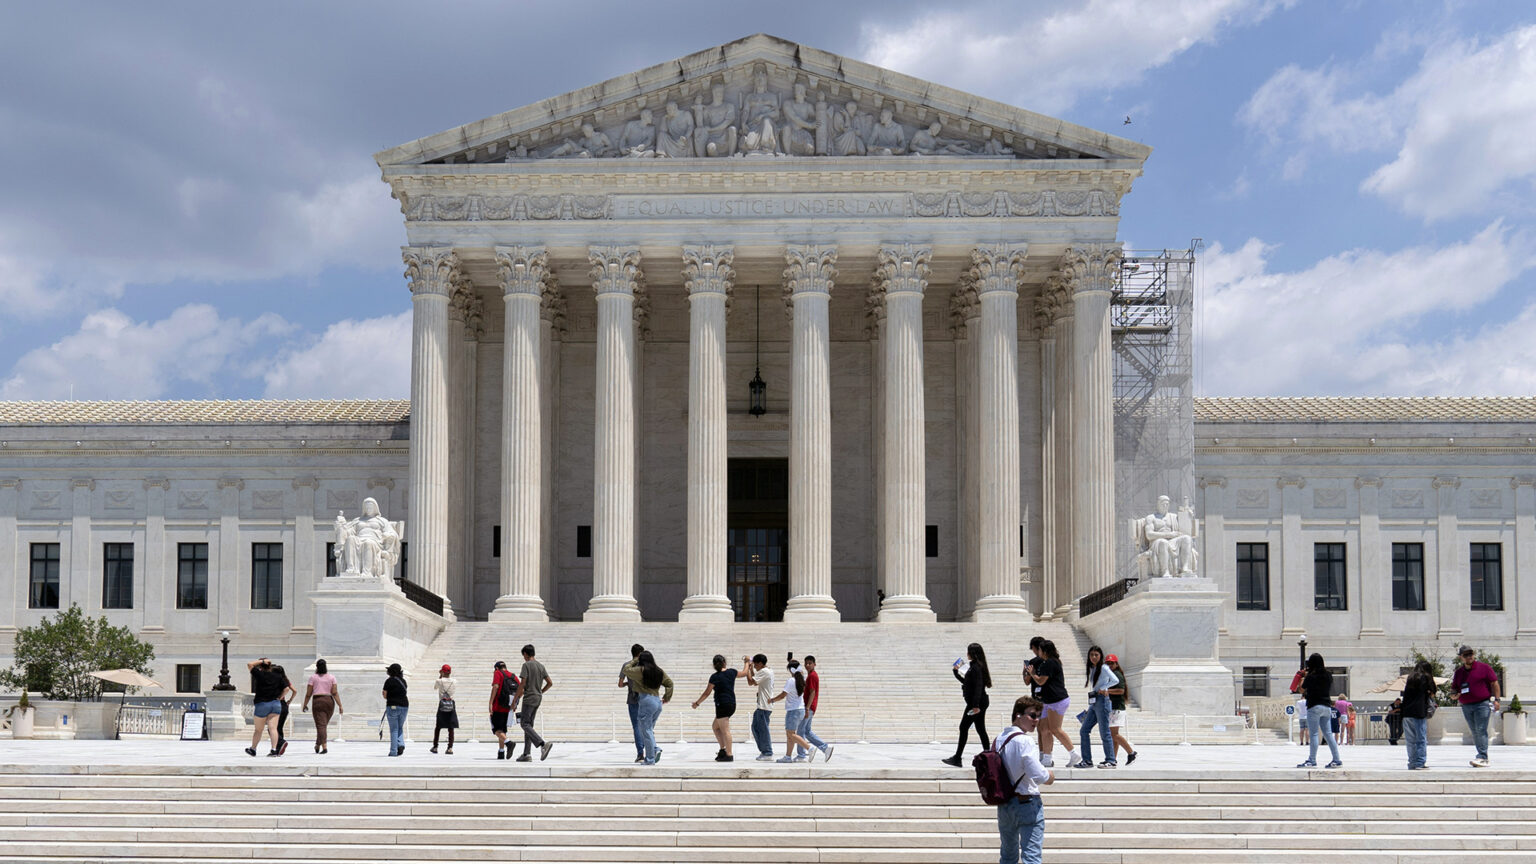 People stand on a steps and a plaza outside the west façade of the U.S. Supreme Court Building with marble masonry, a portico of columns flanked at their base by two sculptures of seated figures, and a pediment with a of sculptures of figures.